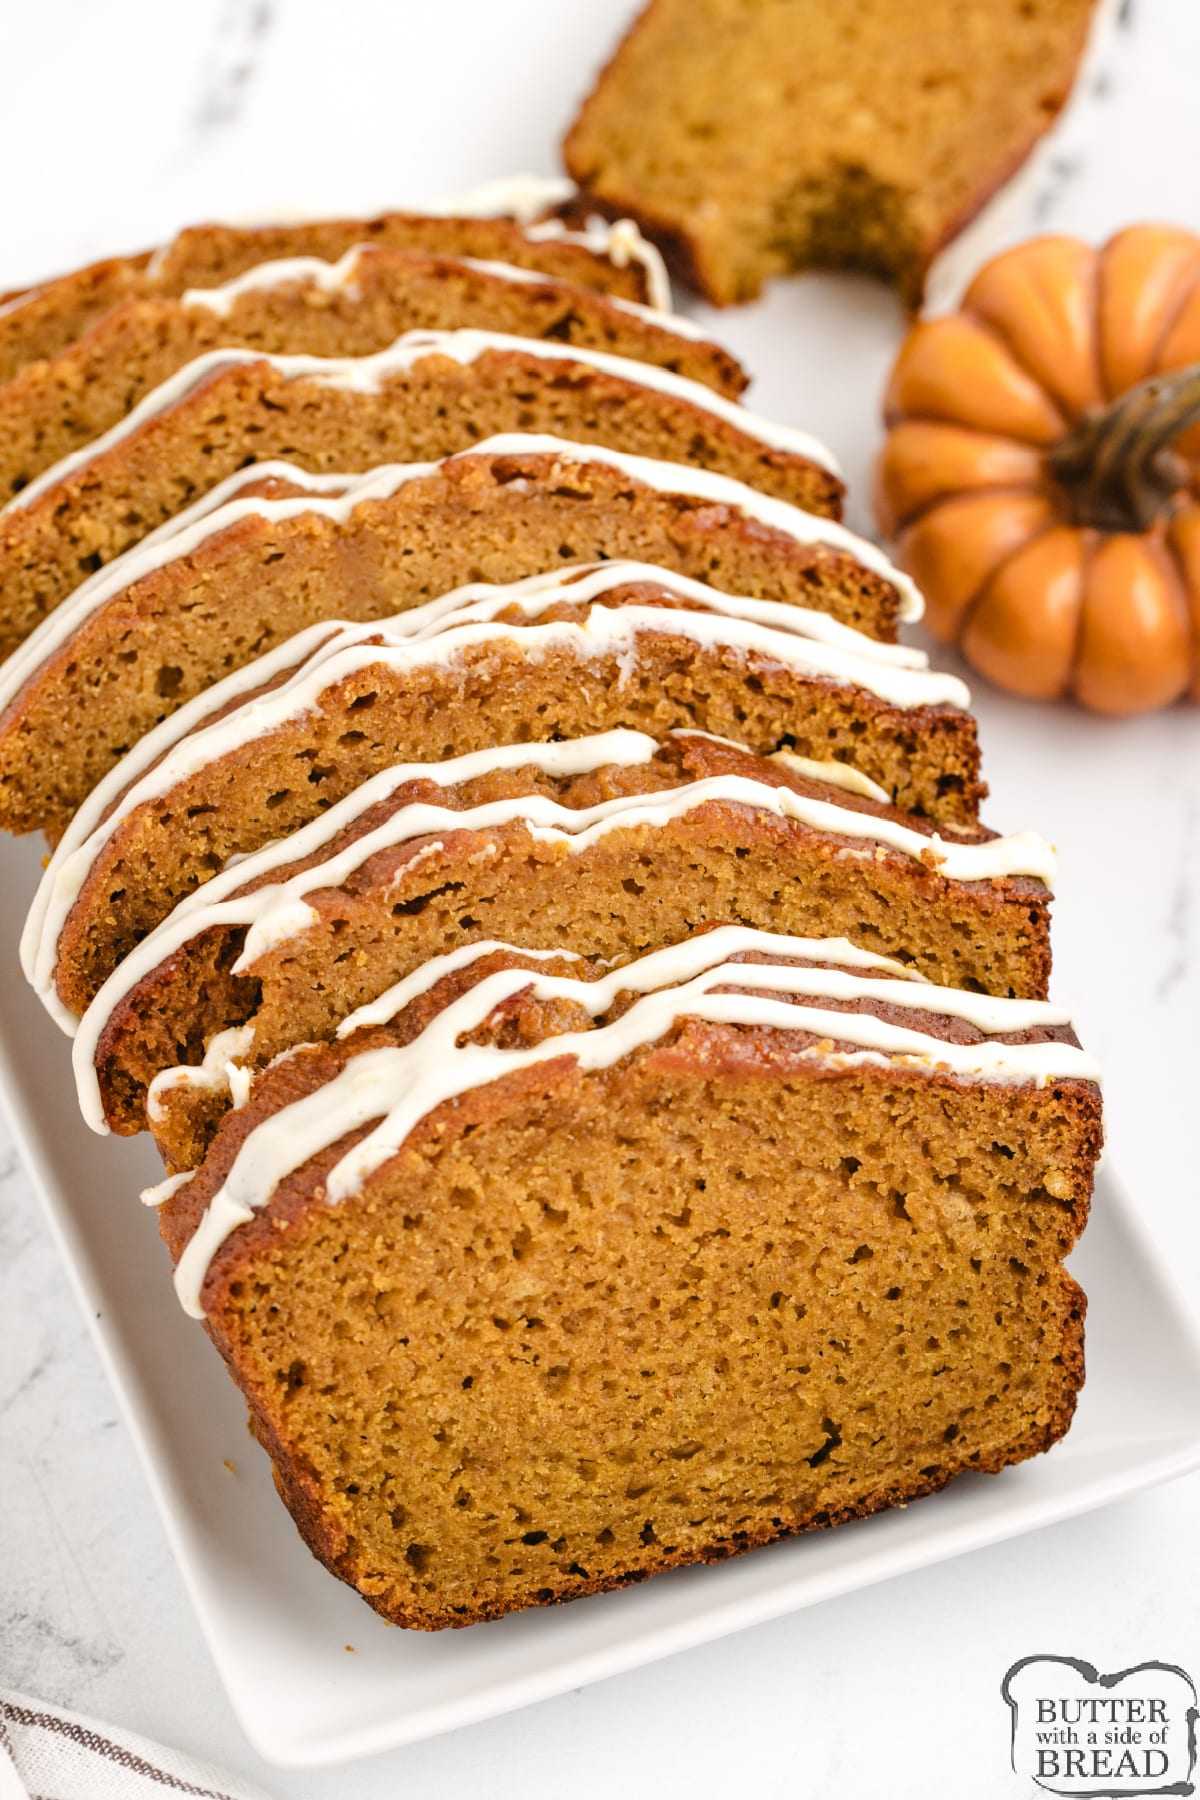 Best Pumpkin Bread that is made with canned pumpkin, vanilla and butterscotch pudding mixes. This deliciously moist pumpkin quick bread recipe is also topped with a delicious cream cheese glaze!